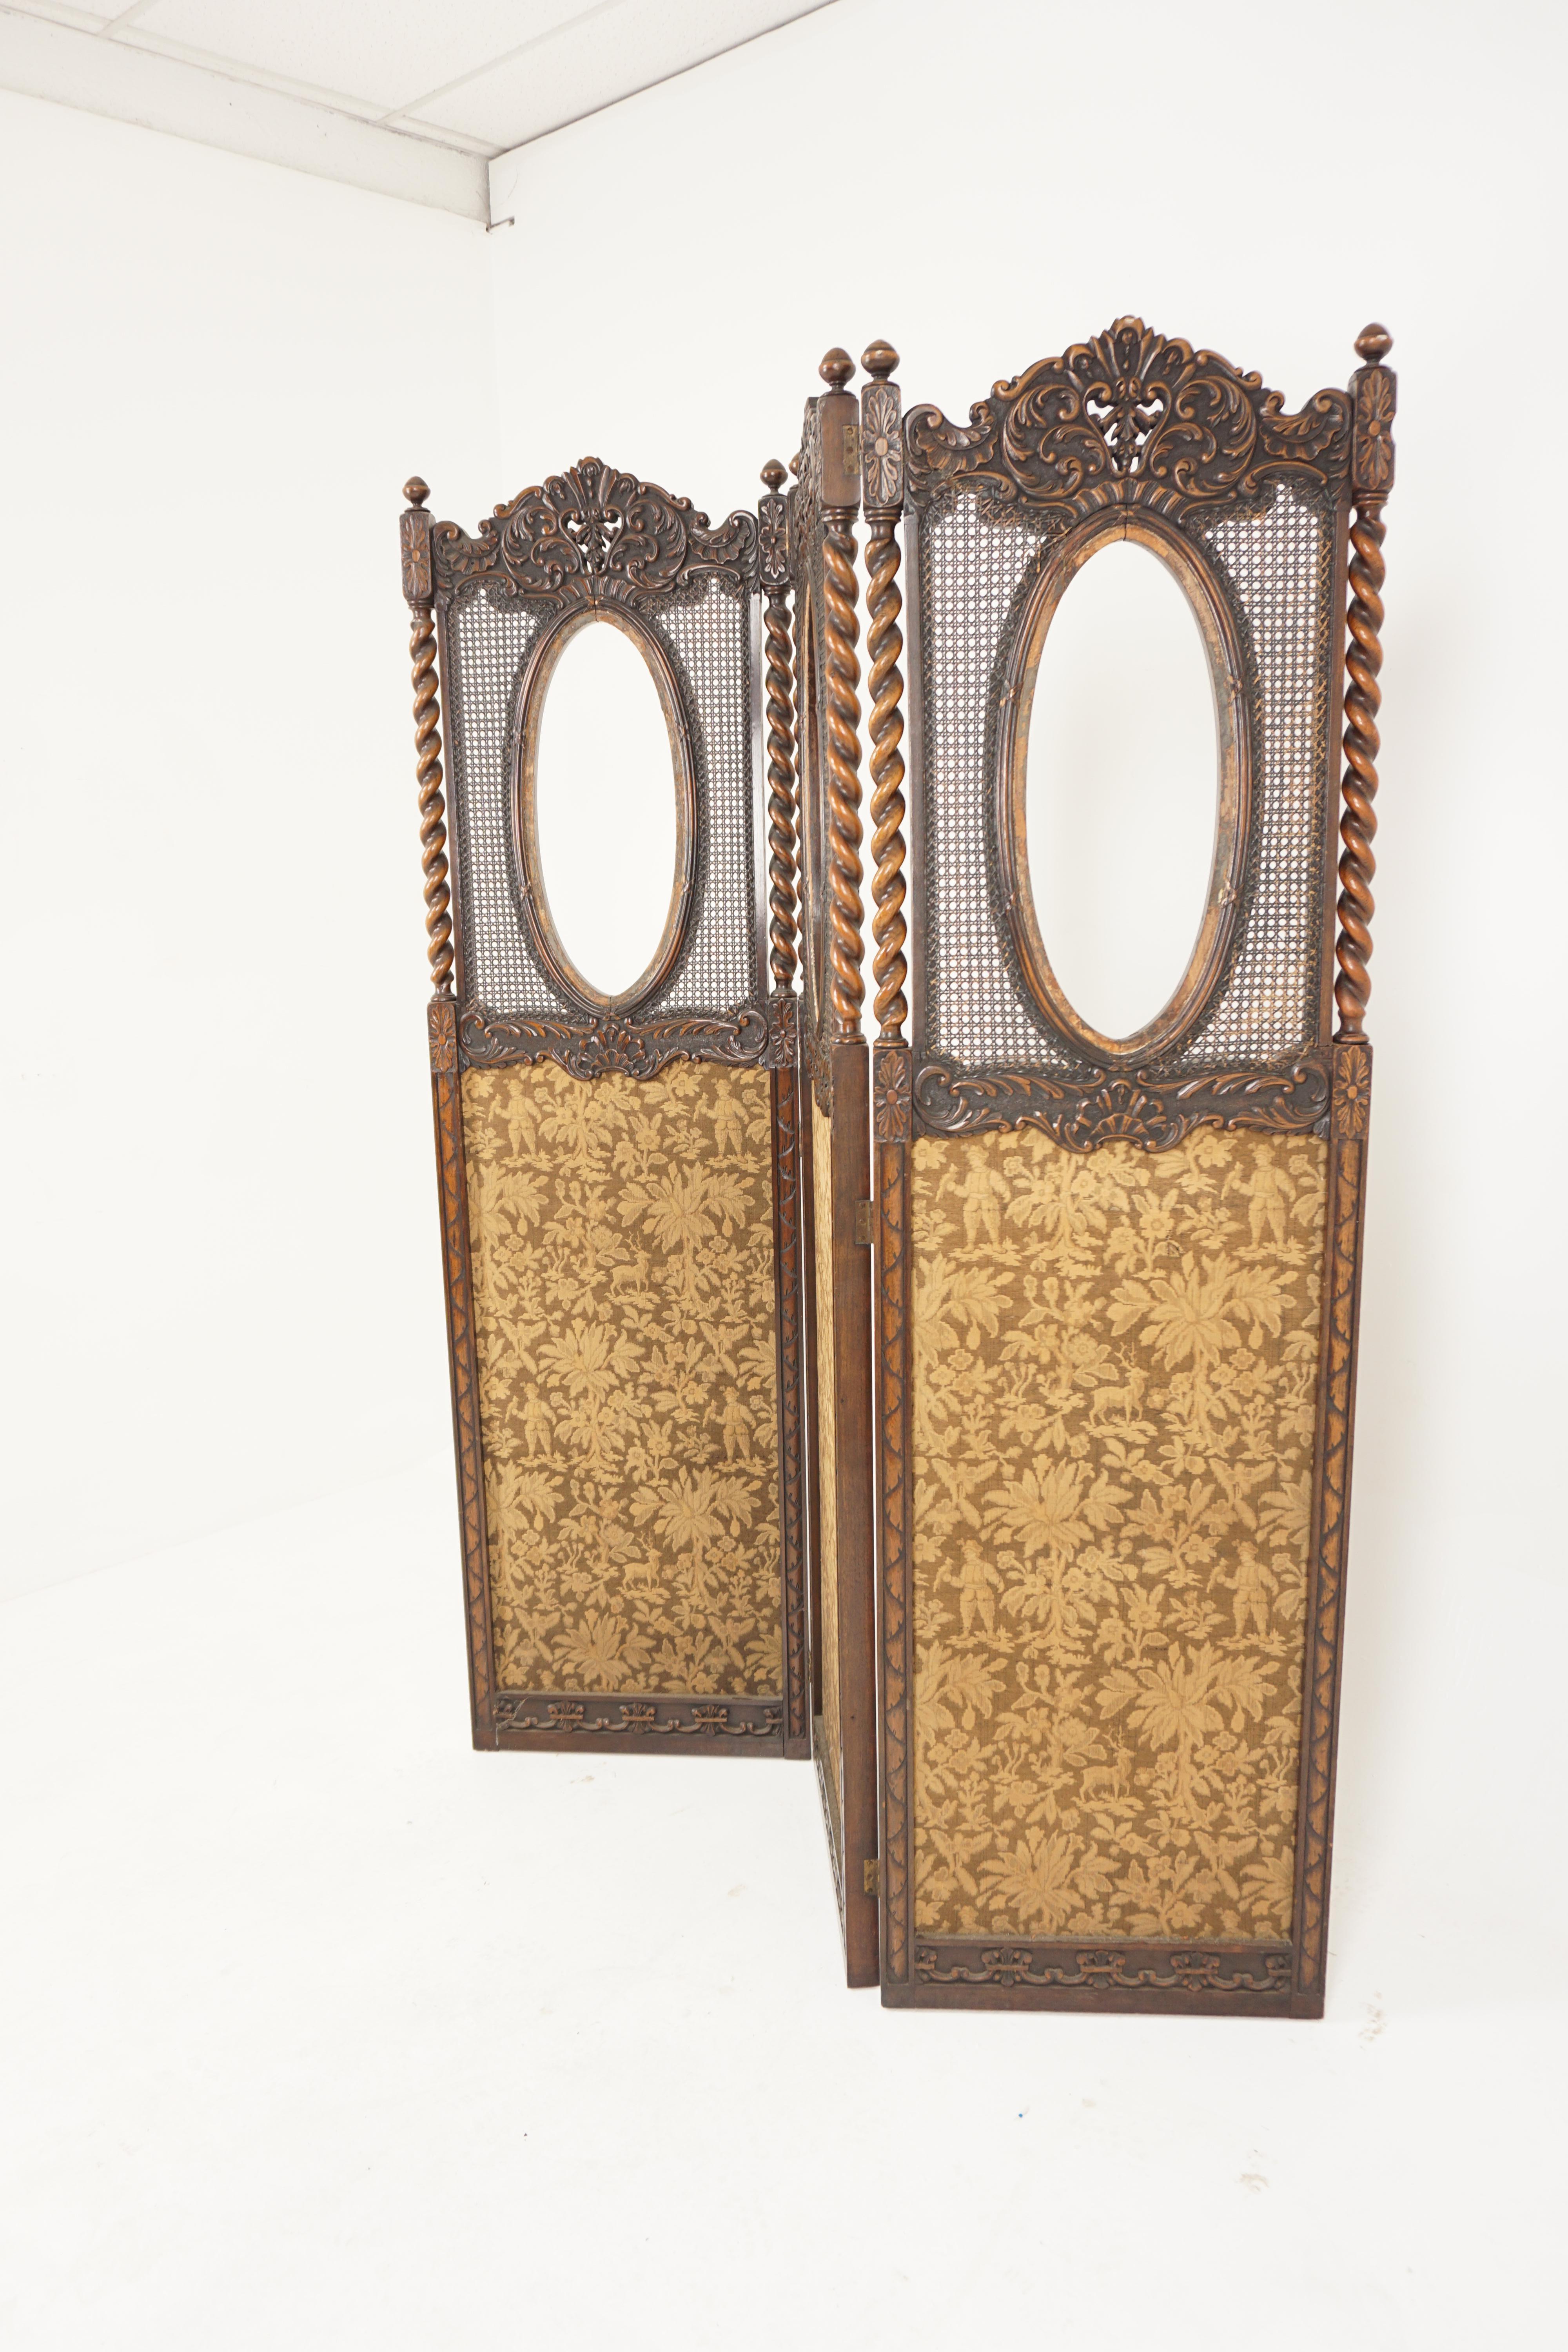 Antique carved walnut barley twist 3 fold panel screen room divider, Scotland, 1900, H604

Scotland 1900
Solid Walnut
Original Finish
Carved top rail with barley twist supports and finials to top
Oval open frame with a bergere carved